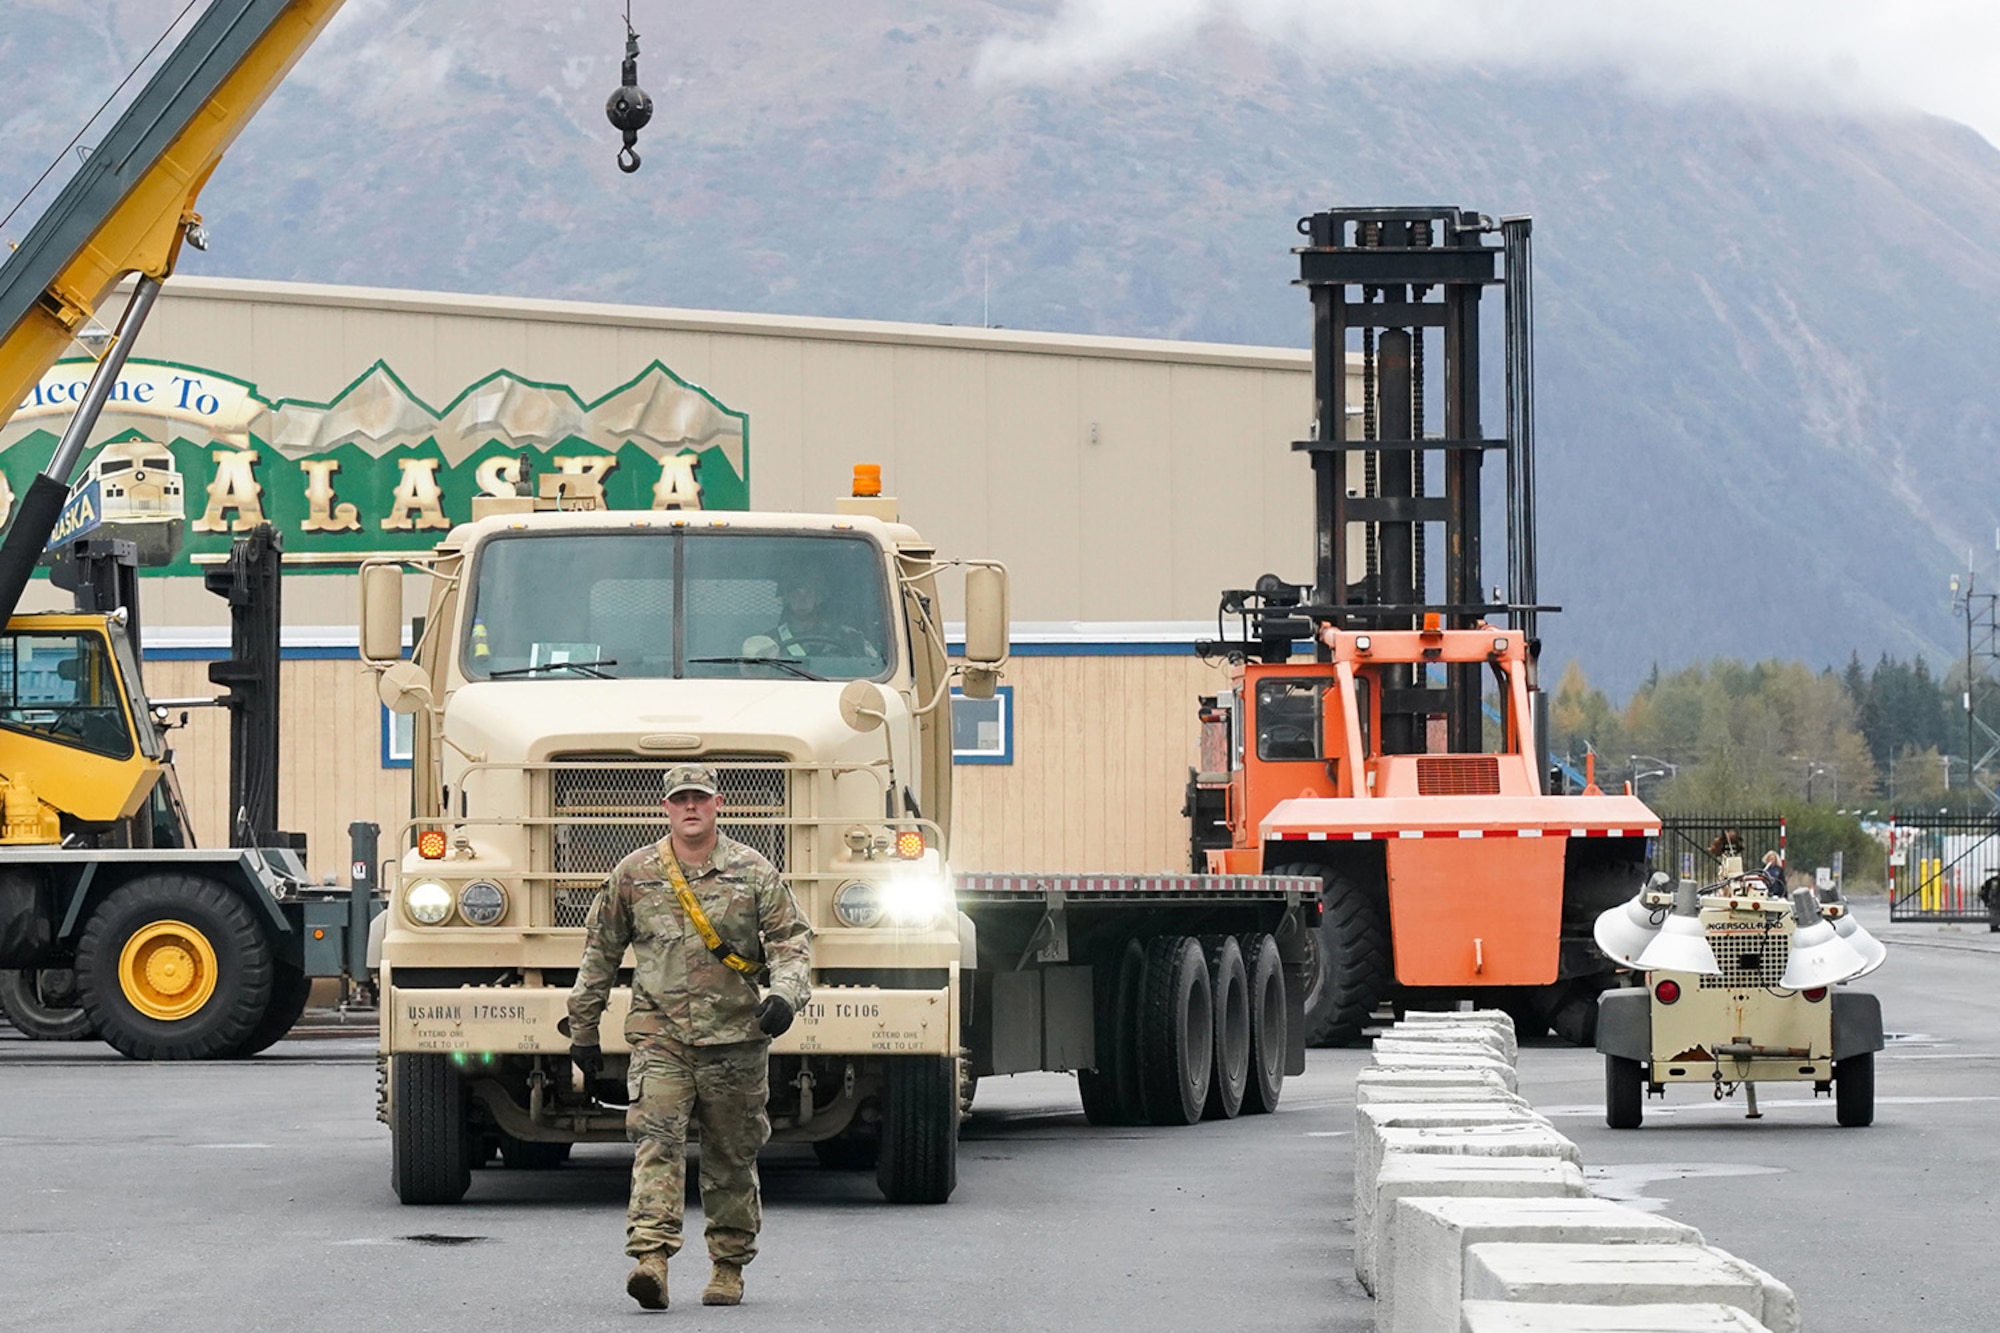 Army Sgt. Dylan Knigge, assigned to the 109th Transportation Company, 17th Combat Support Sustainment Battalion, U.S. Army Alaska, ground guides a M915A5 tractor with an M872 trailer to a staging area for loading U.S. Marine Corps bulk fuel supplies and equipment from the U.S.S. Comstock (LSD-45), a Whidbey Island-class dock landing ship, at the port of Seward, Alaska, Sept. 19, 2019, for transport to Joint Base Elmendorf-Richardson, Alaska. The U.S. Navy is conducting an Arctic Expeditionary Capabilities Exercise to test its logistical effectiveness and joint-service interoperability while responding to conflict or disaster in an austere environment with no organic assets.